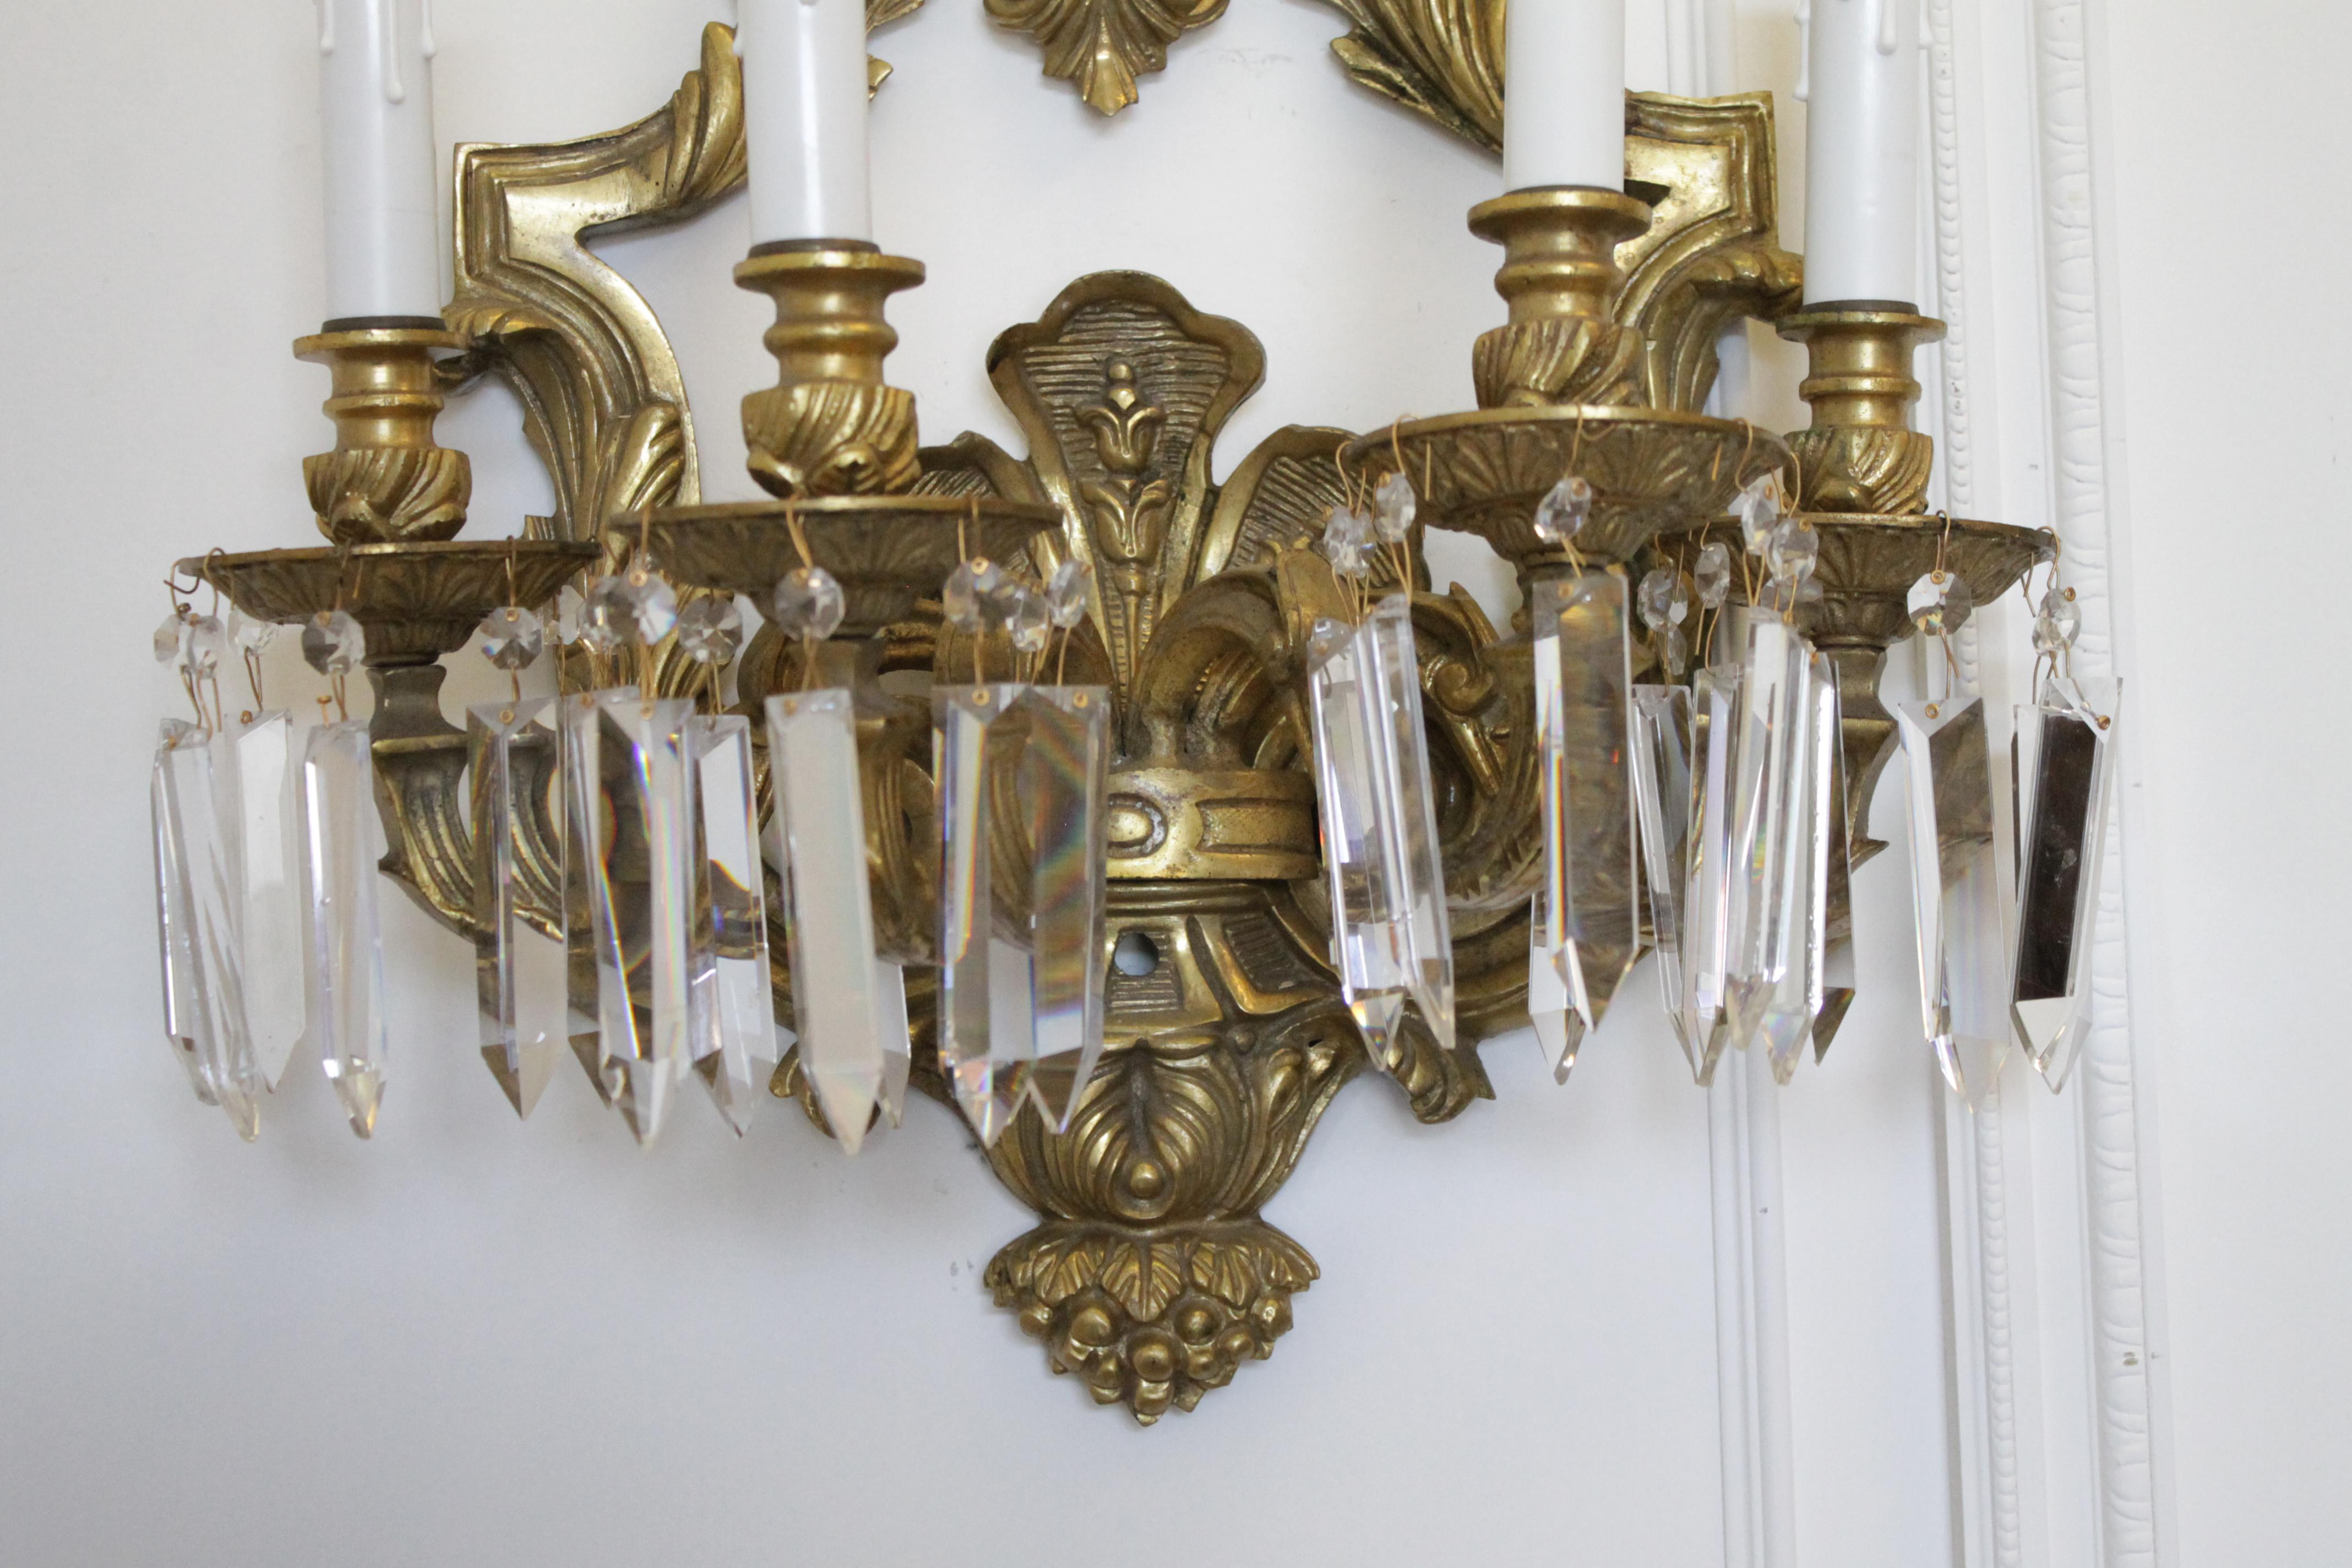 Pair of French gilt bronze sconces with crystals
Measures: 17